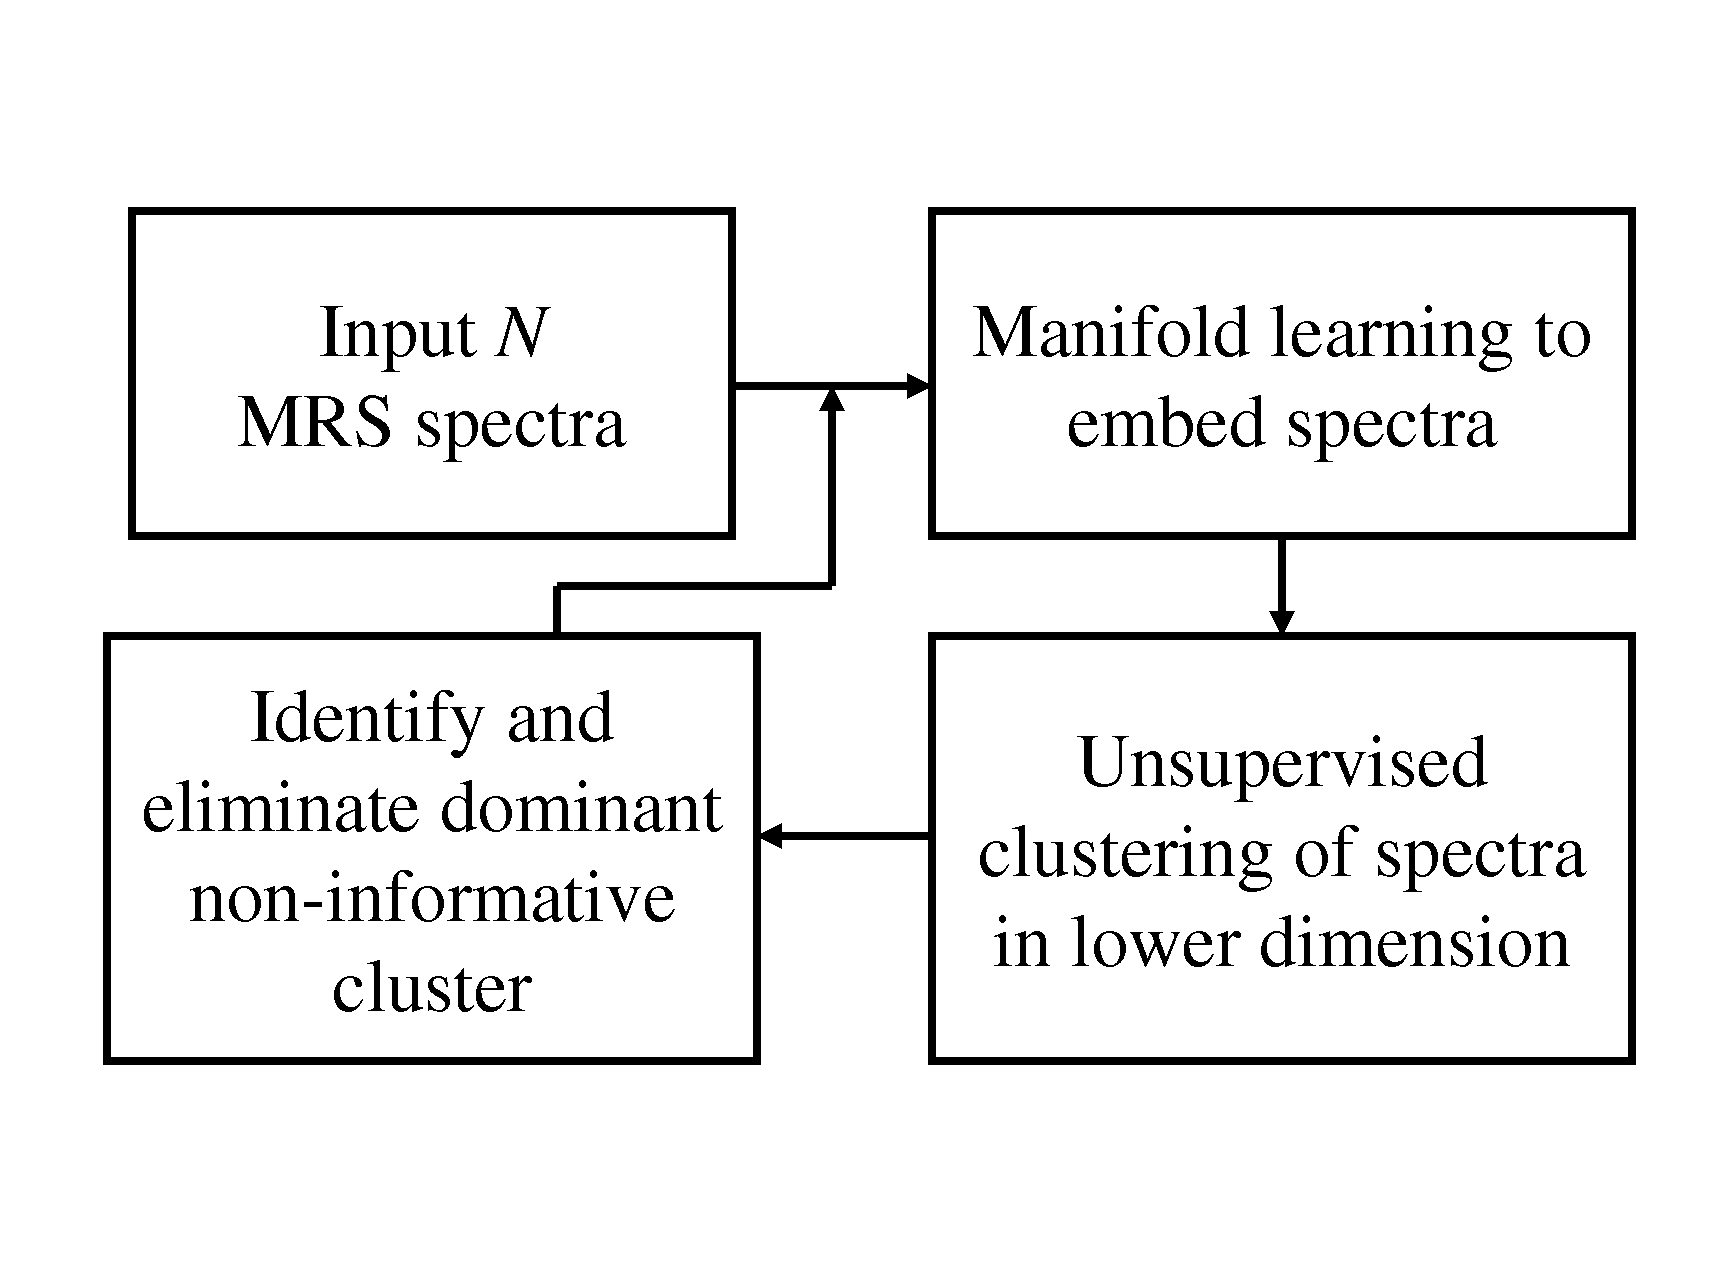 Computer assisted diagnosis (CAD) of cancer using multi-functional, multi-modal in-vivo magnetic resonance spectroscopy (MRS) and imaging (MRI)